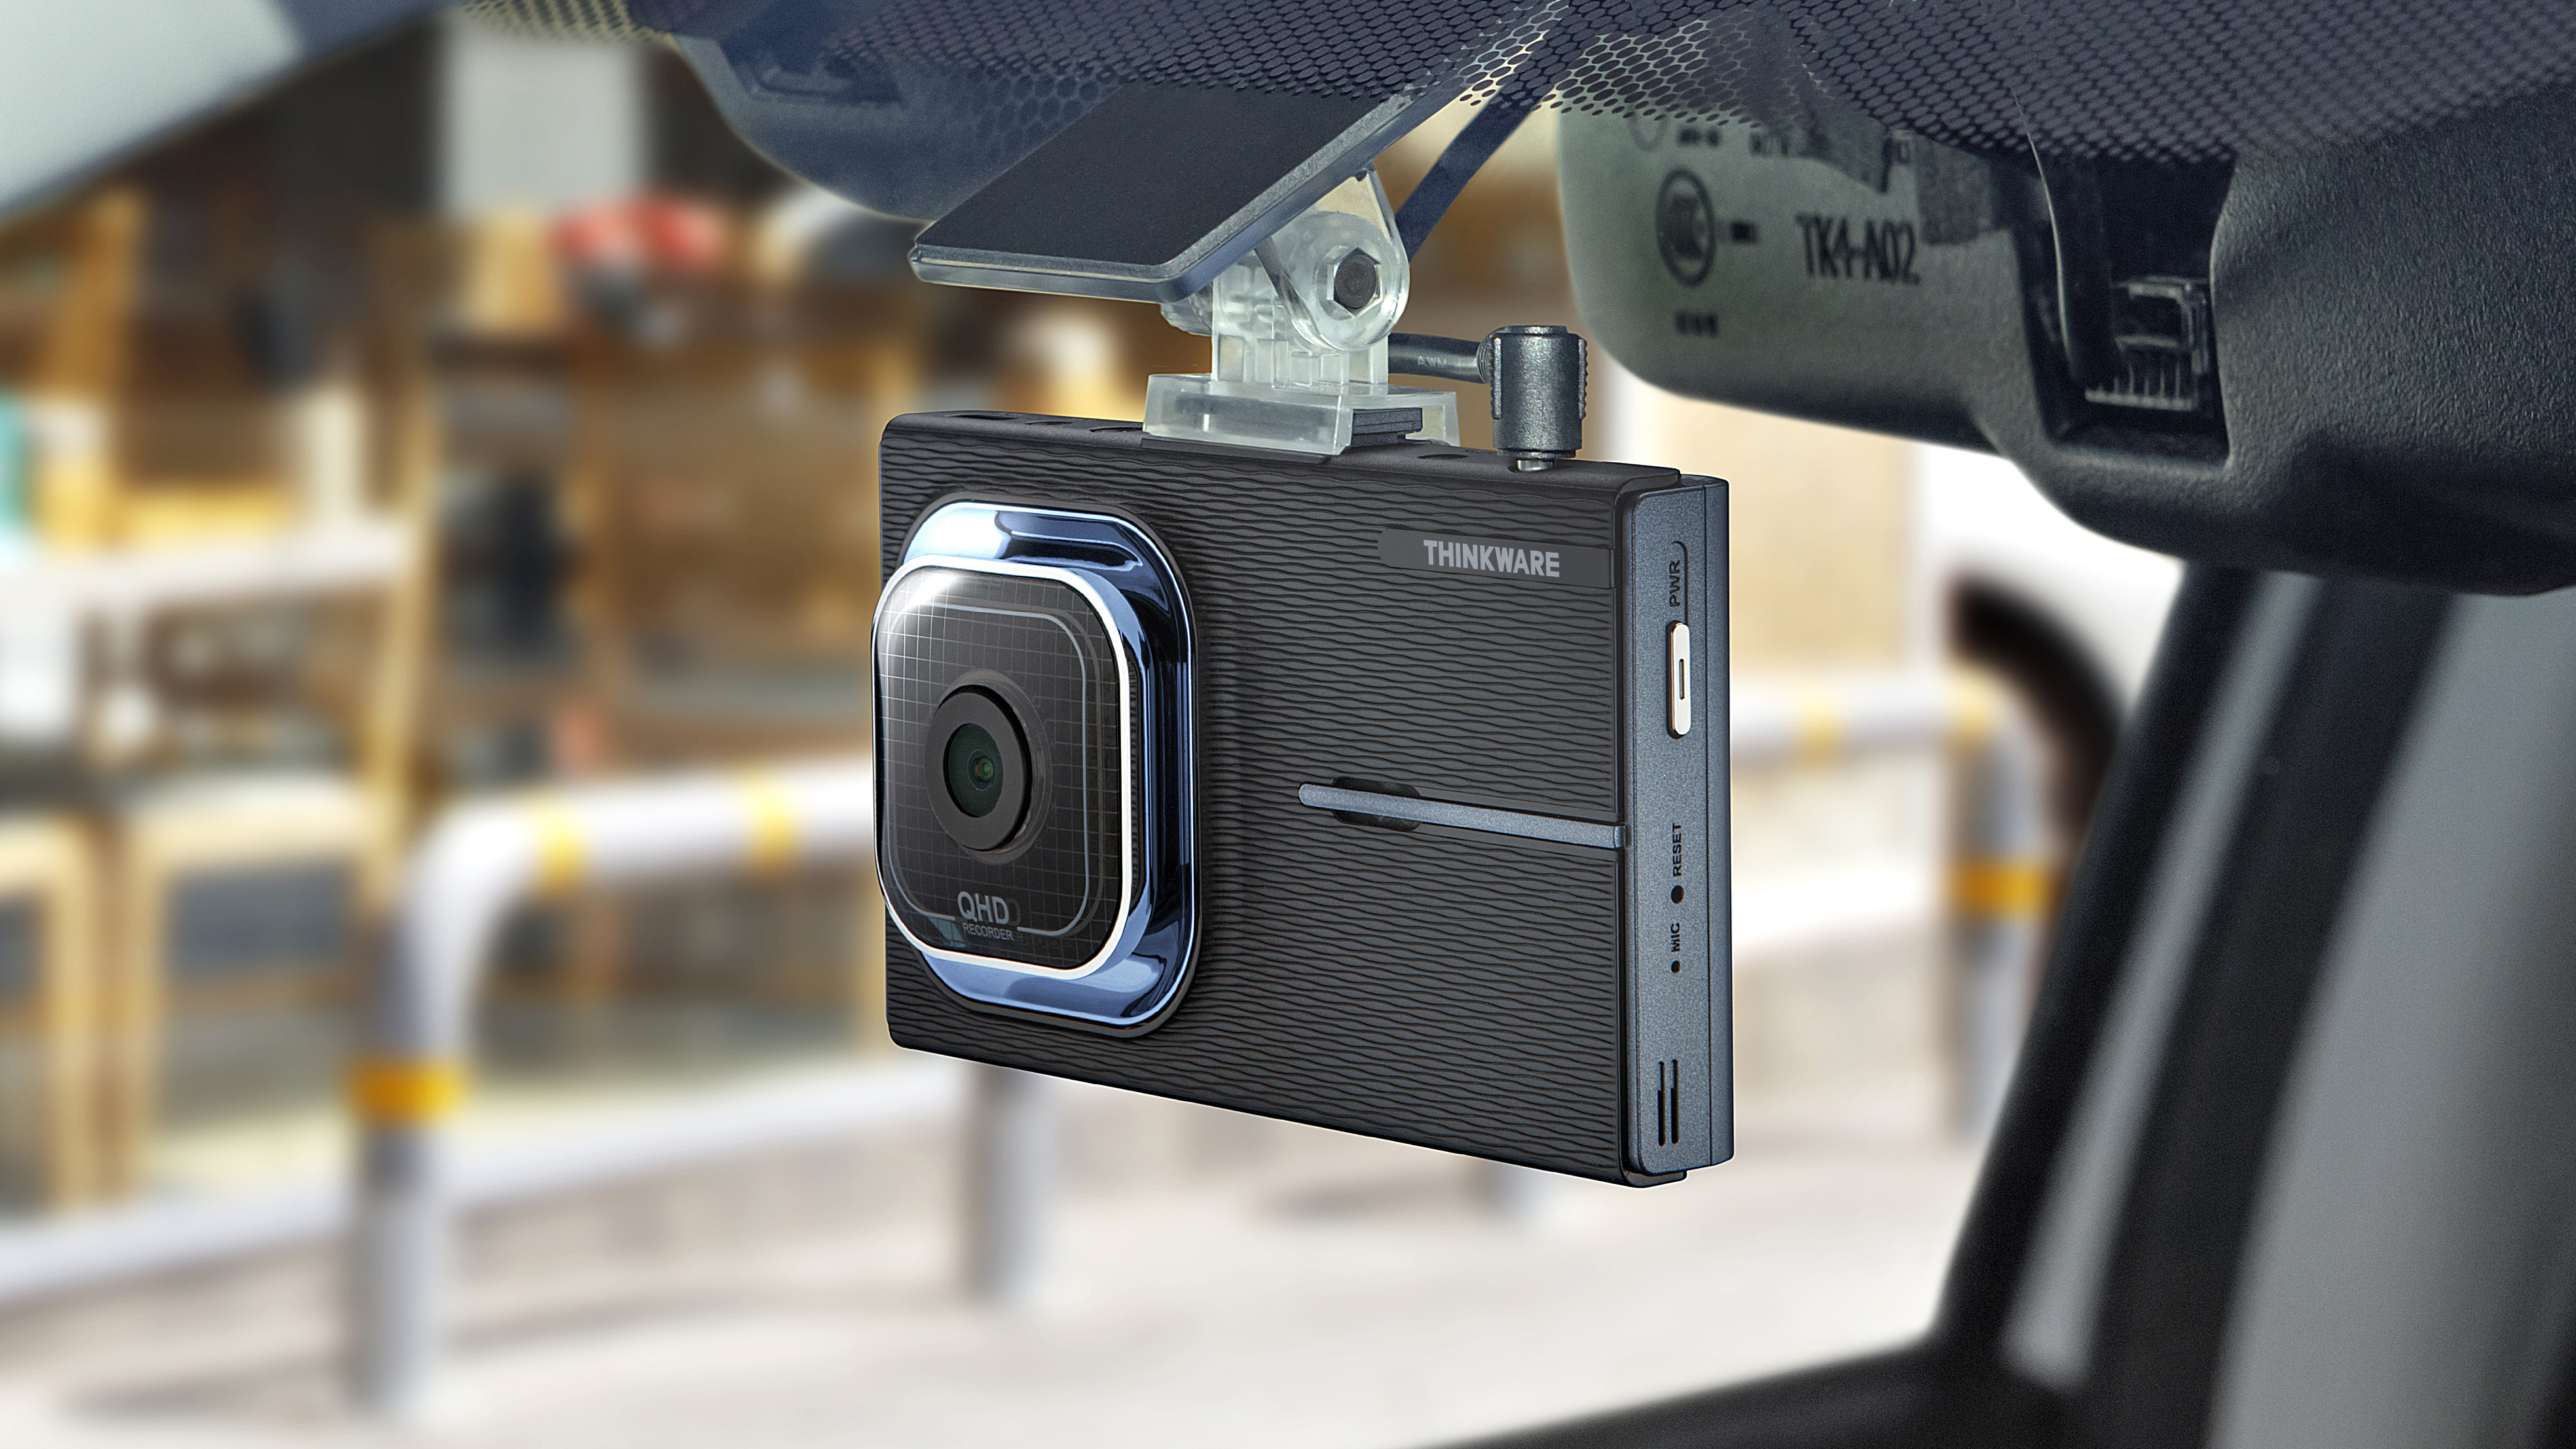 Snag a 70mai Dash Cam During This Early Black Friday Sale - CNET